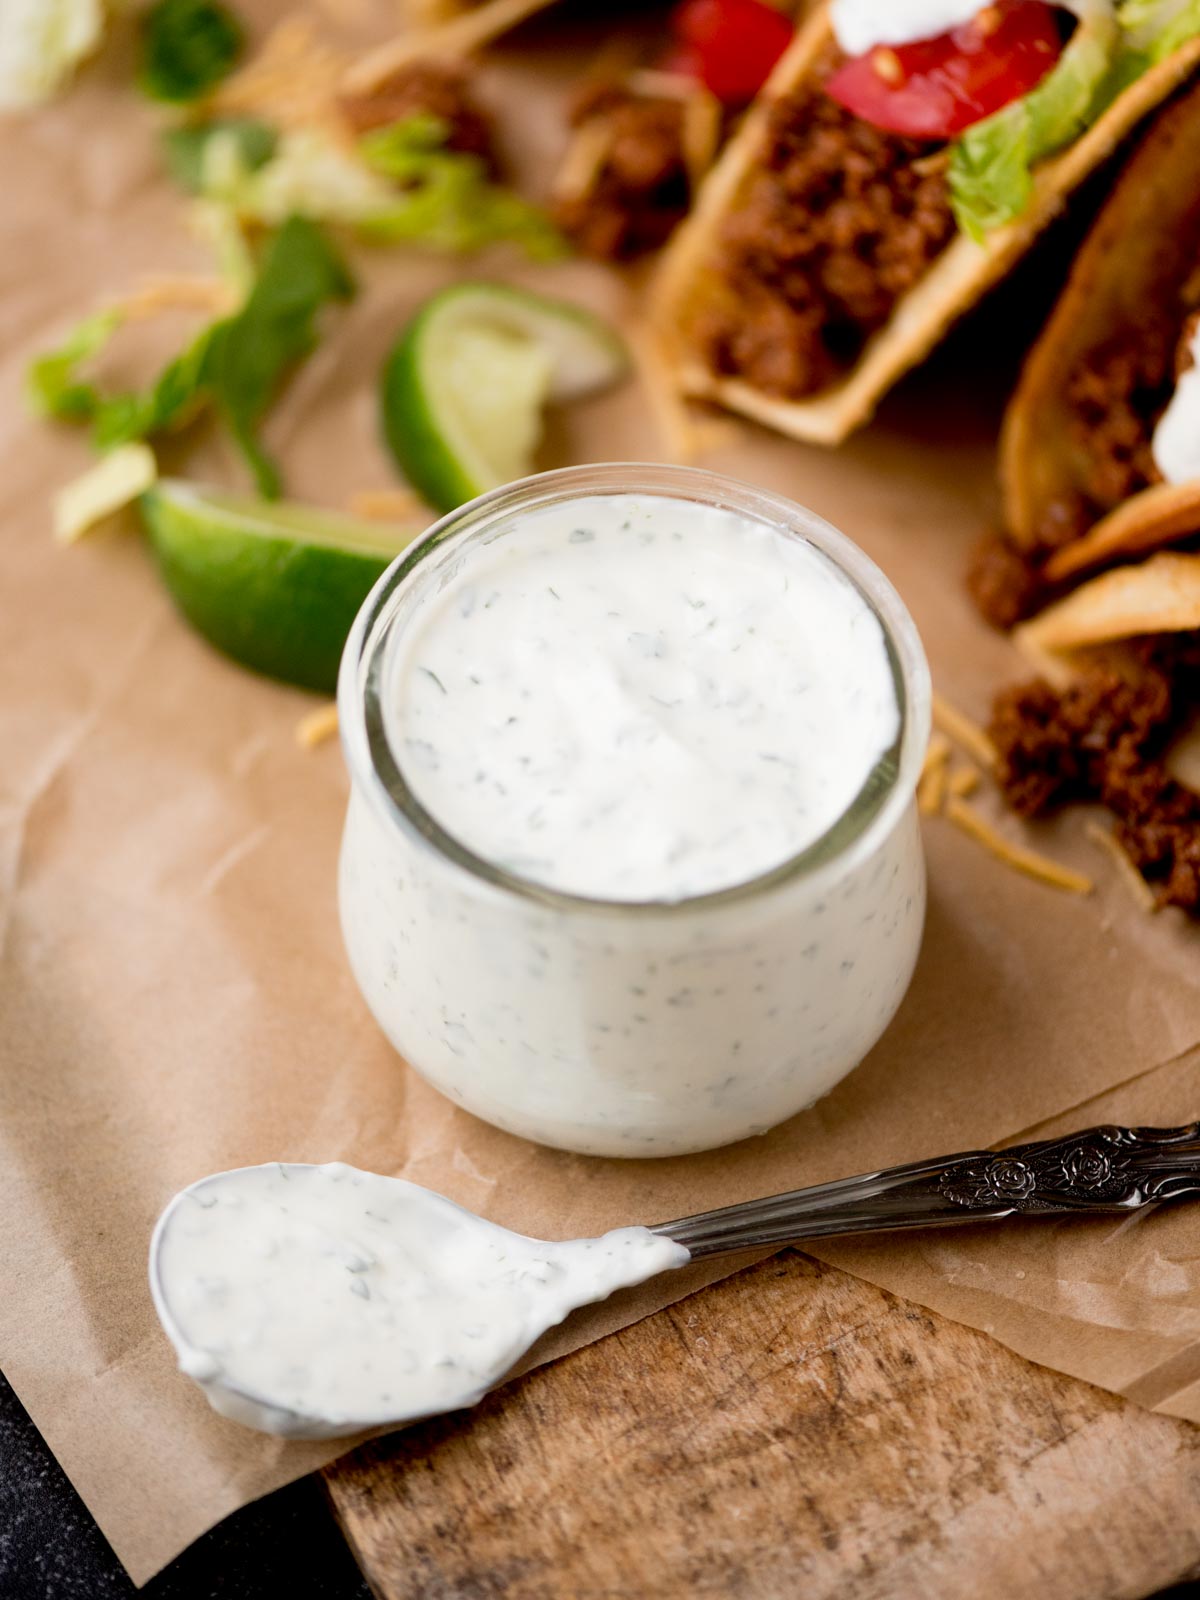 A creamy cilantro lime sauce filling a small glass jar with a spoon covered in the sauce resting next to it.